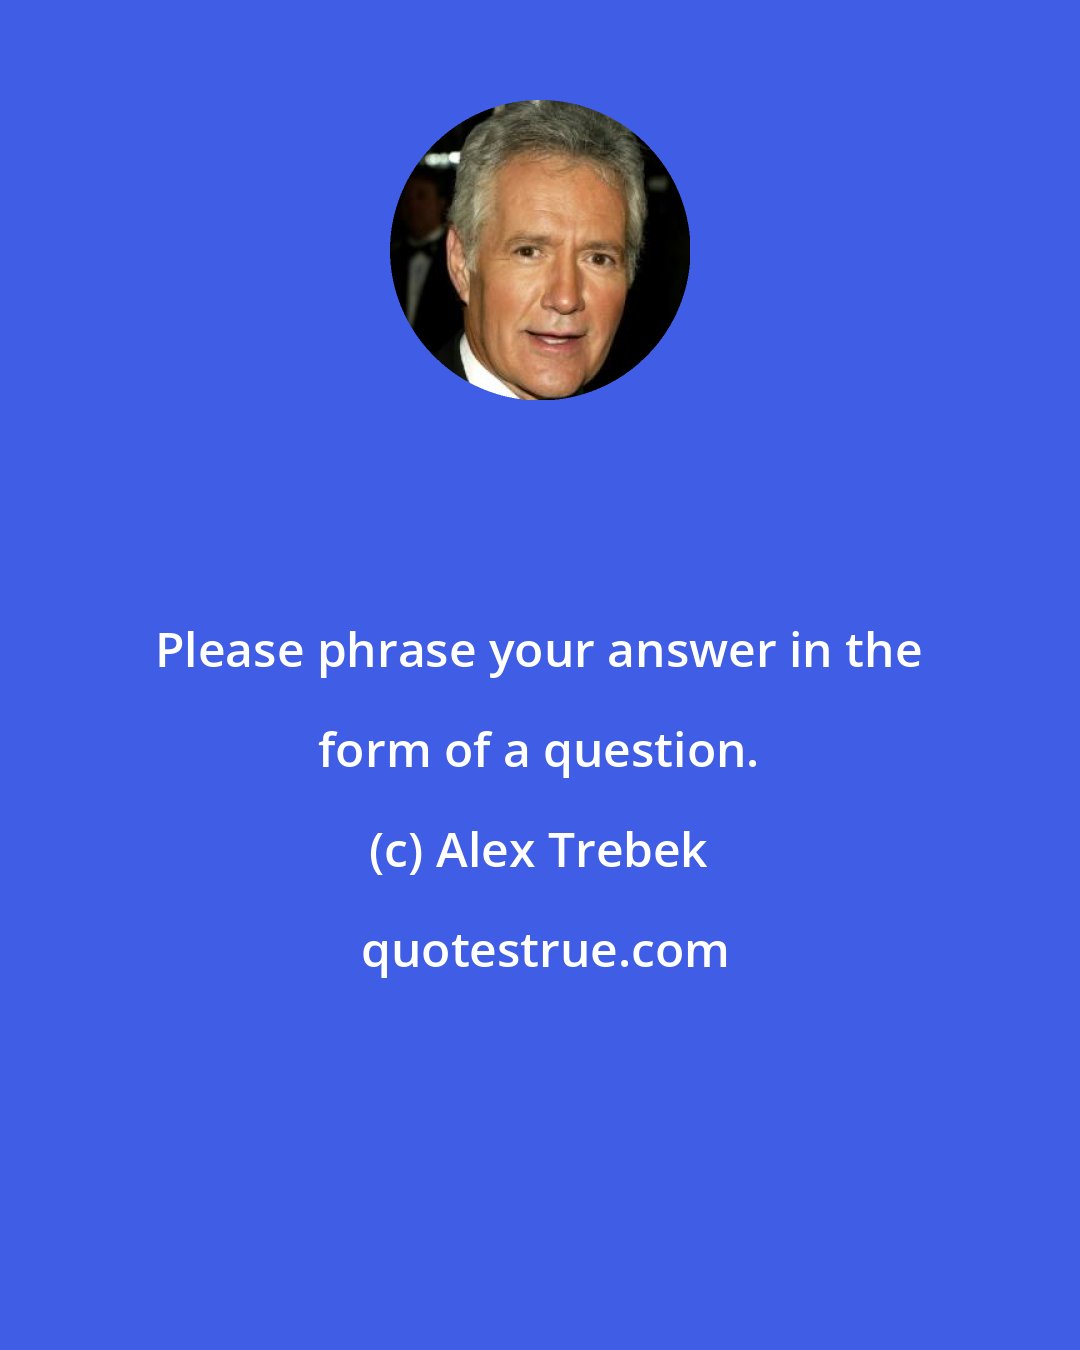 Alex Trebek: Please phrase your answer in the form of a question.